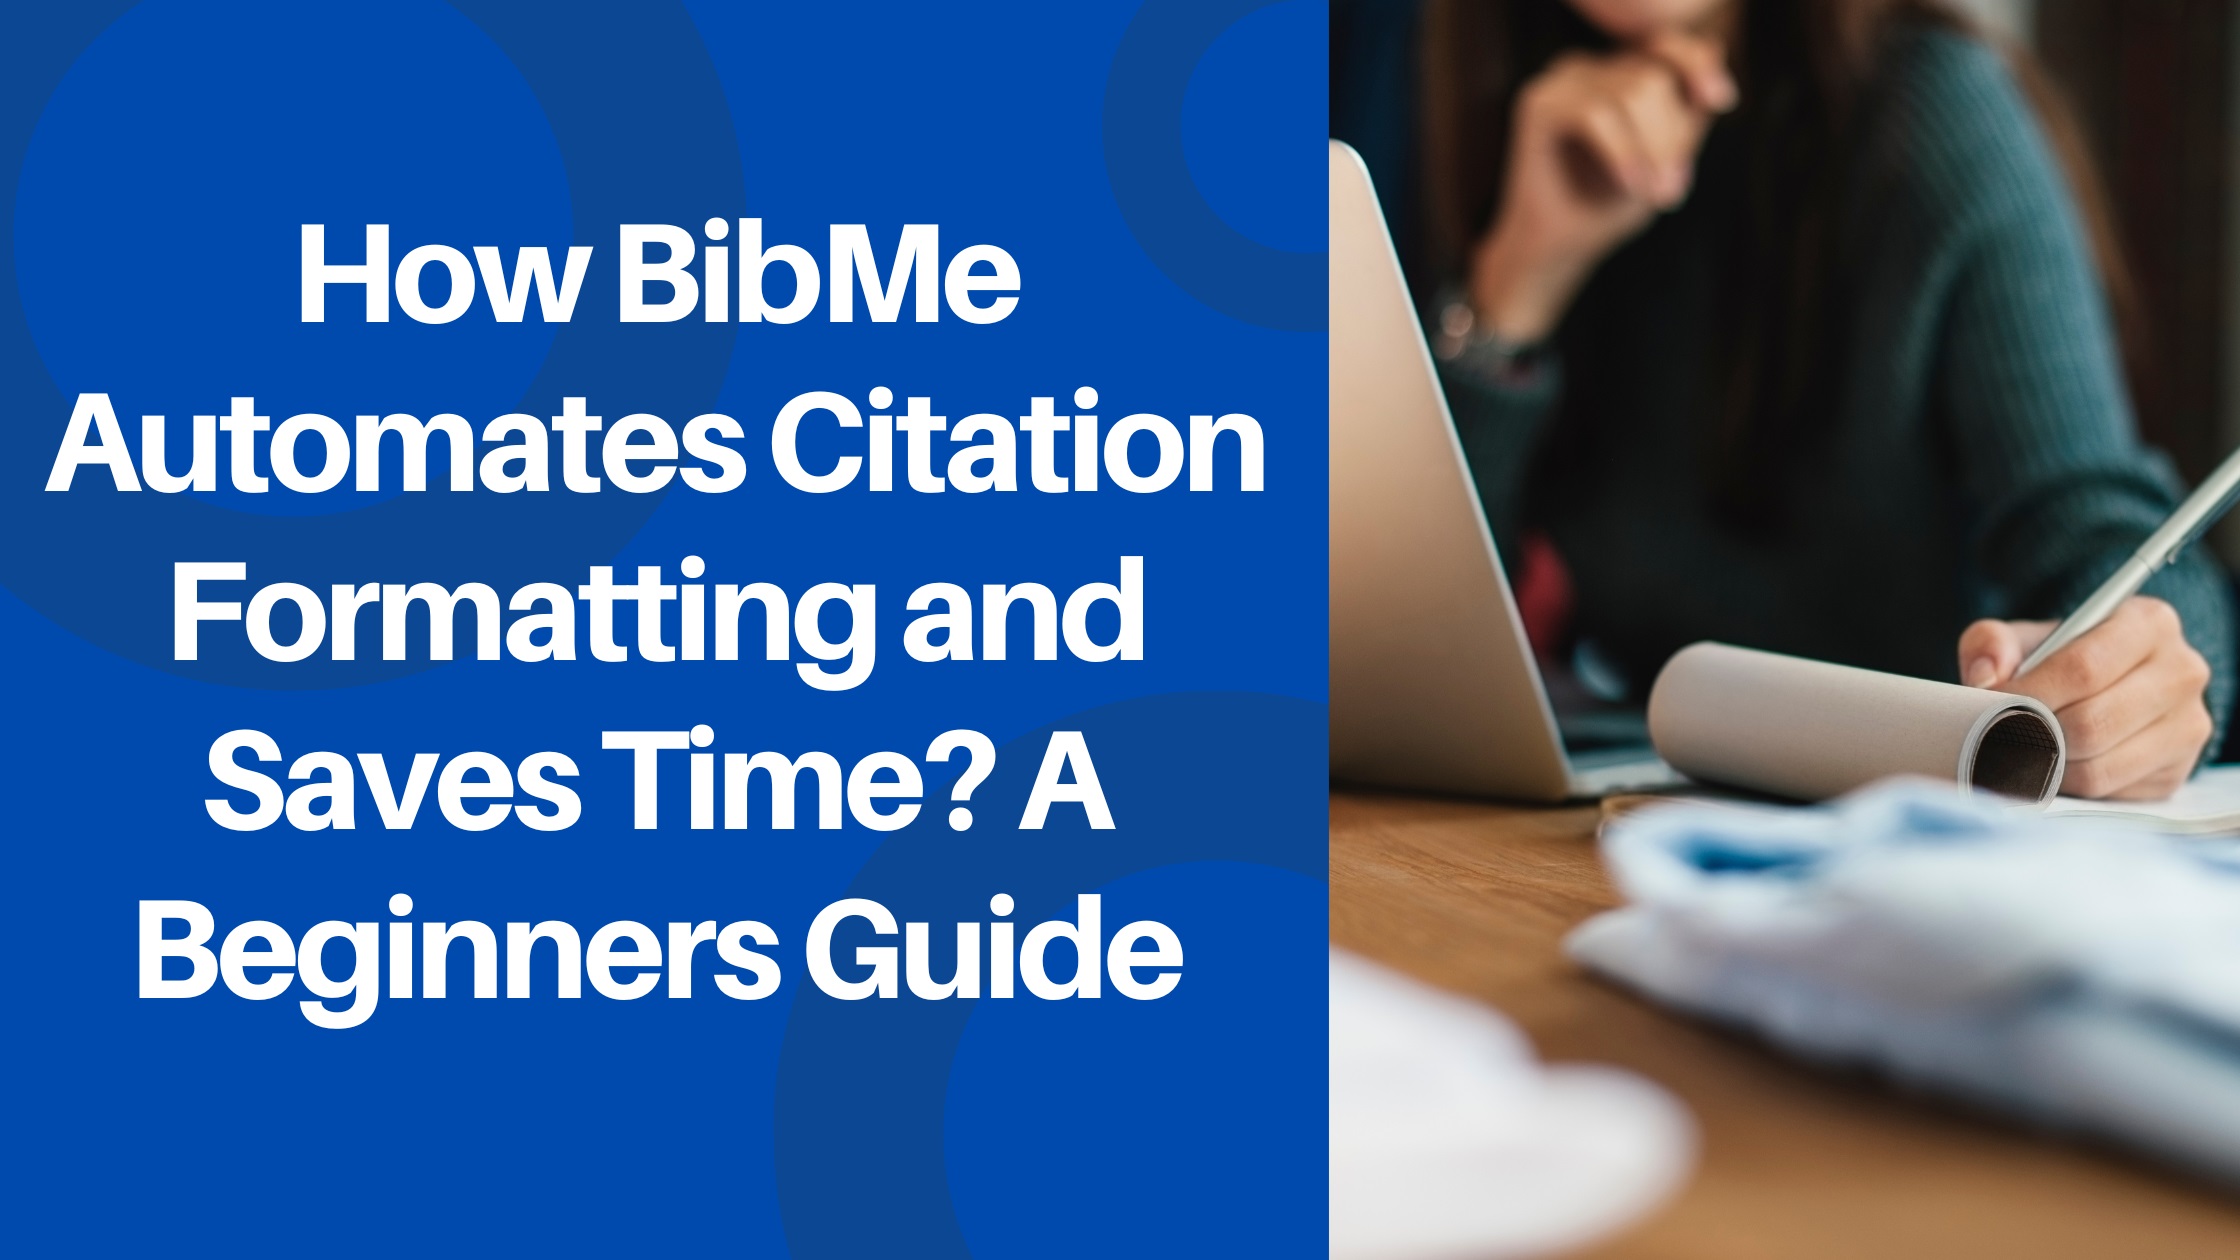 How BibMe Automates Citation Formatting and Saves Time? A Beginners Guide